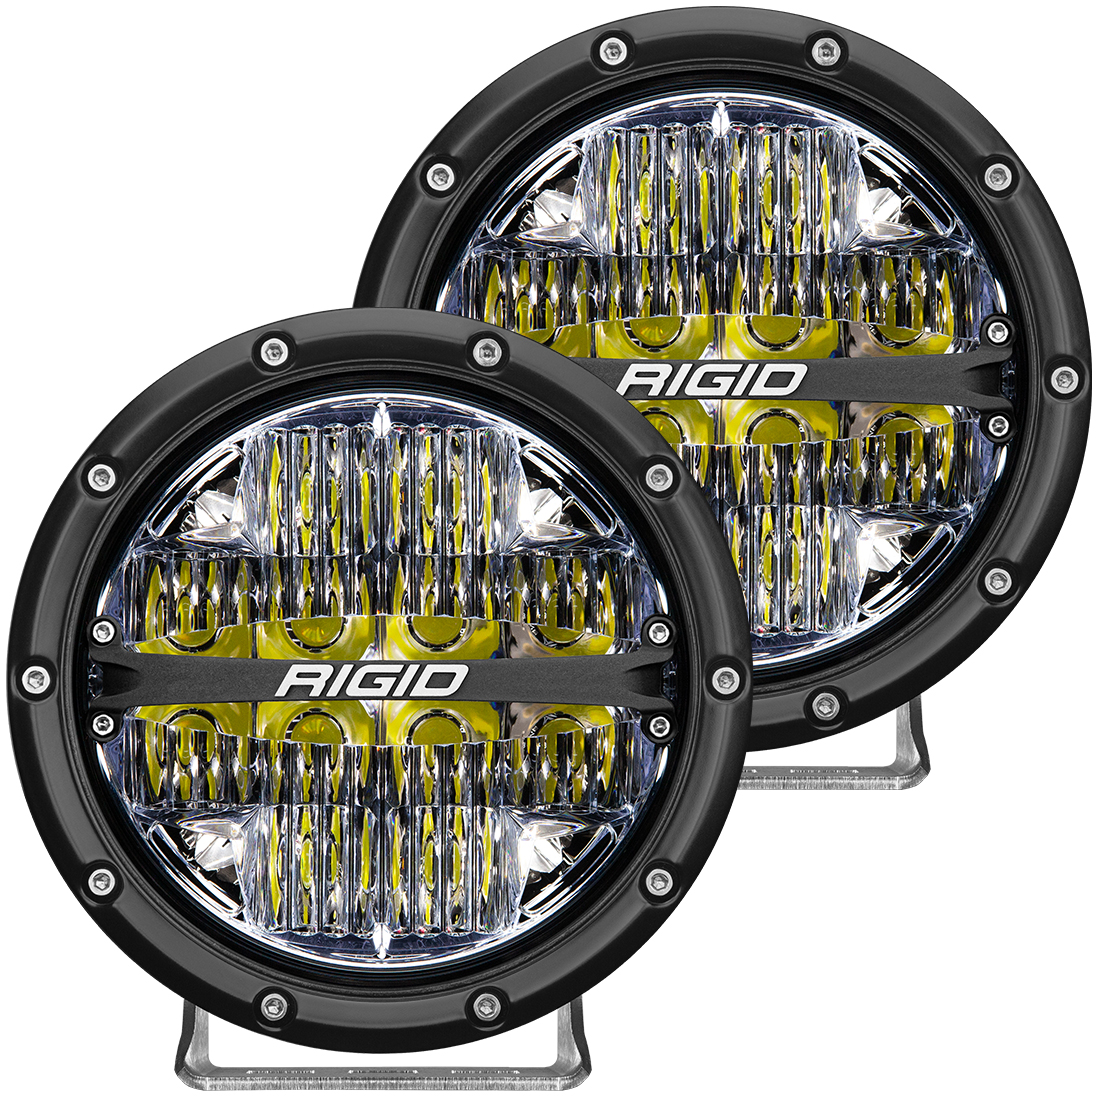 Rigid Industries 360-Series 6 Inch Led Off-Road Drive Beam White Backlight Pair